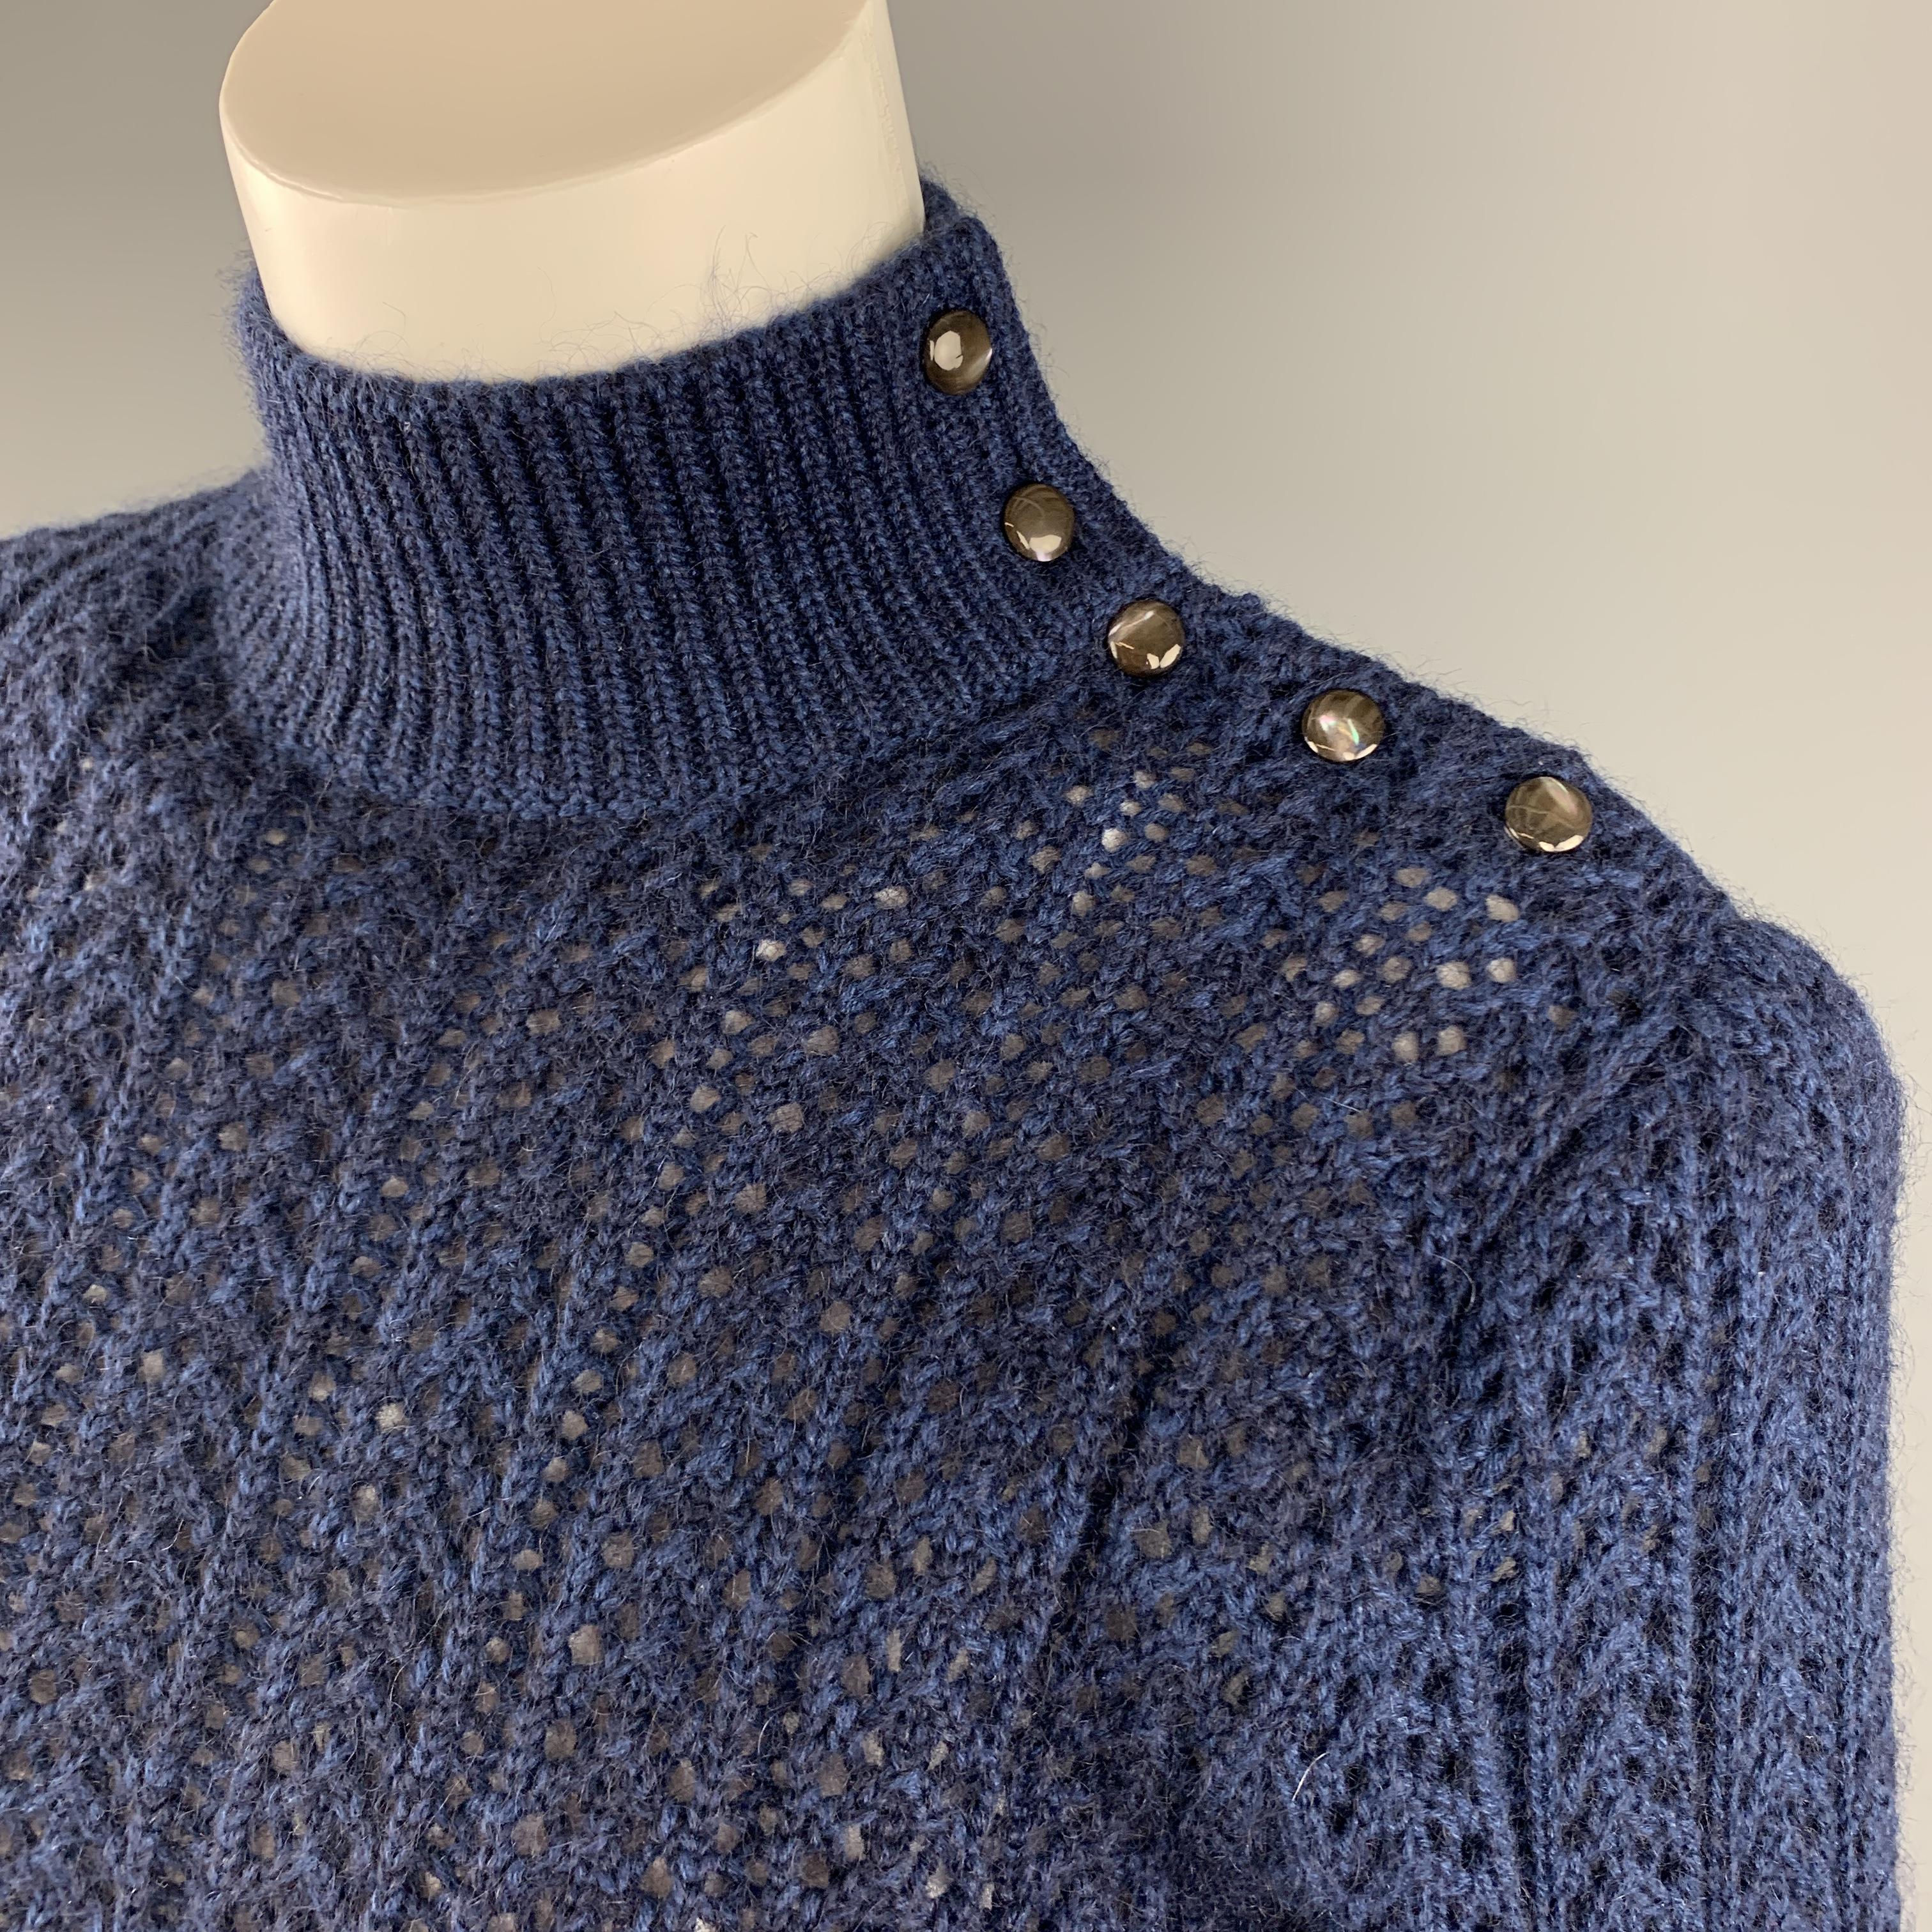 MARC JACOBS sweater comes in blue cashmere blend textured knit with a high neck collar that buttons on the side and cropped hem. Made in Italy.

Excellent Pre-Owned Condition.
Marked: L

Measurements:

Shoulder: 15 in.
Bust: 36 in.
Sleeve: 25